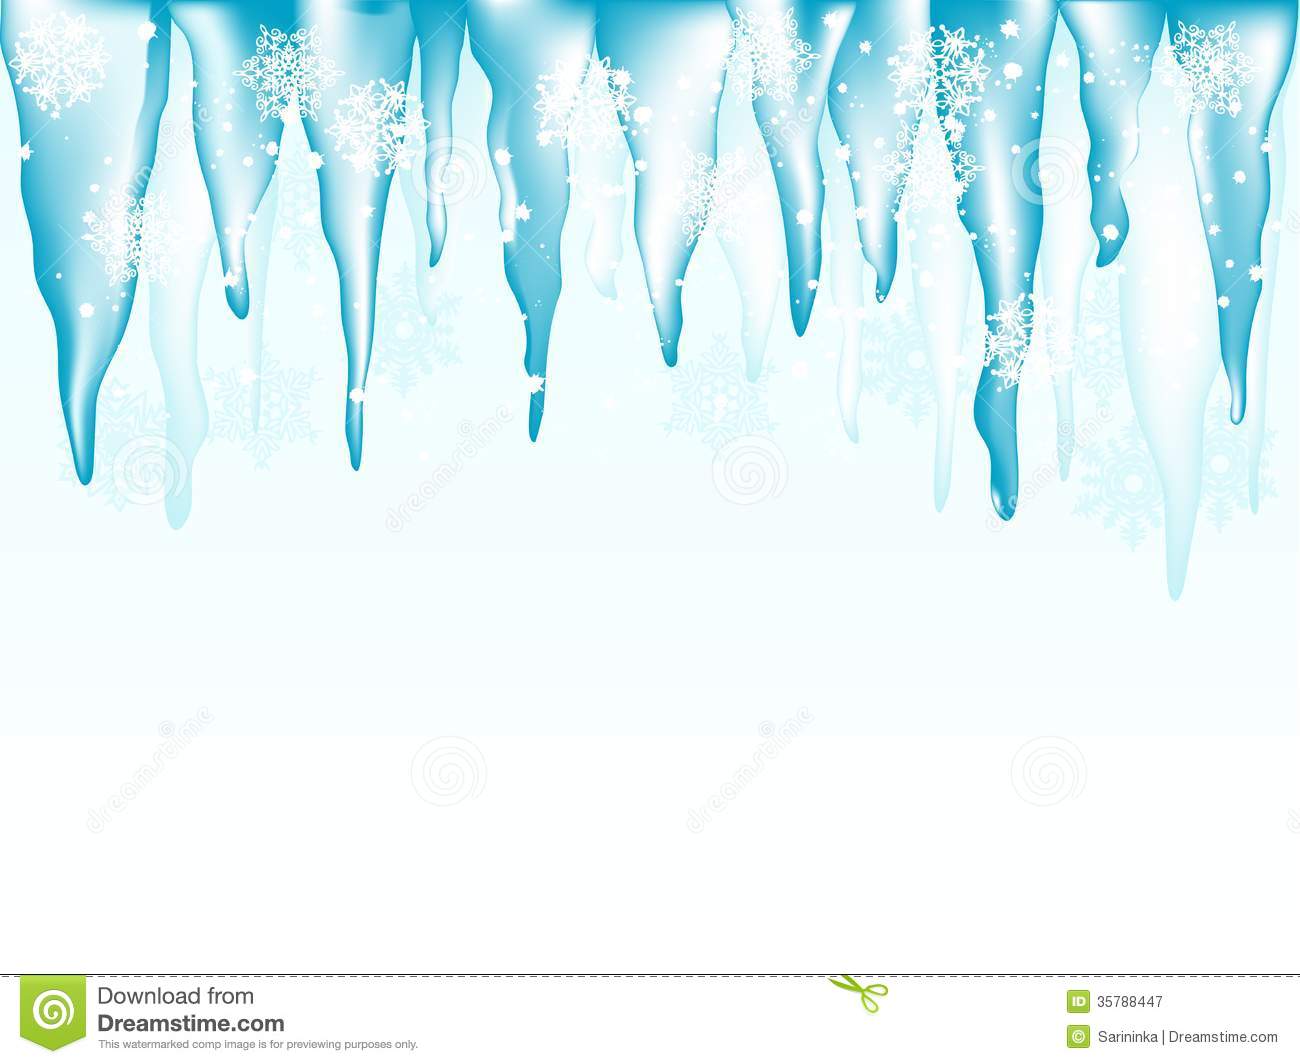 Icicle Clipart & Icicle Clip Art Images.